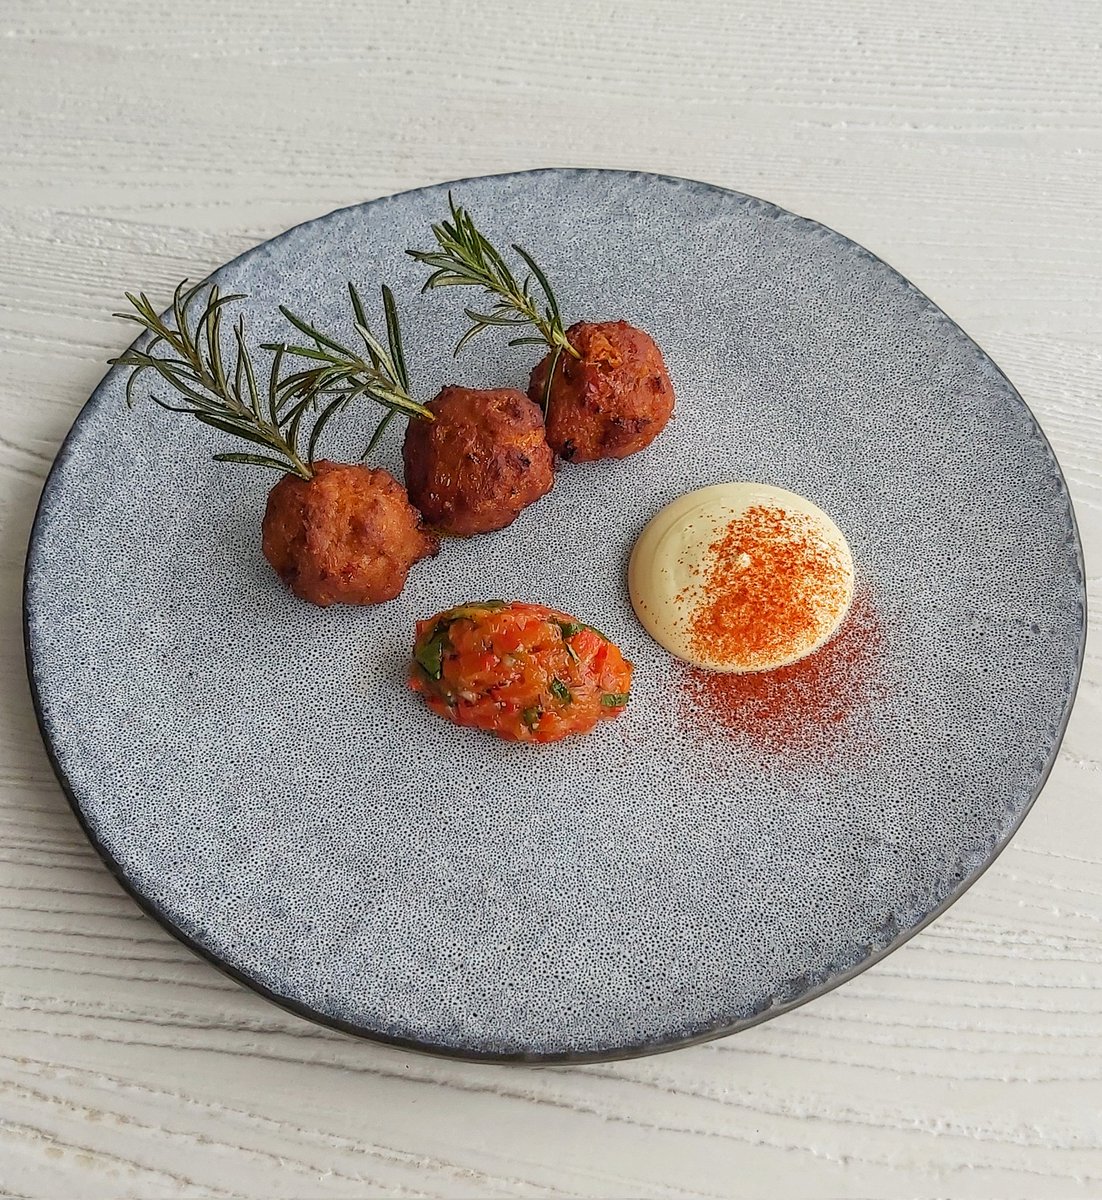 Nduja and fennel sausage meatballs, roasted red pepper salsa, rosemary aioli.